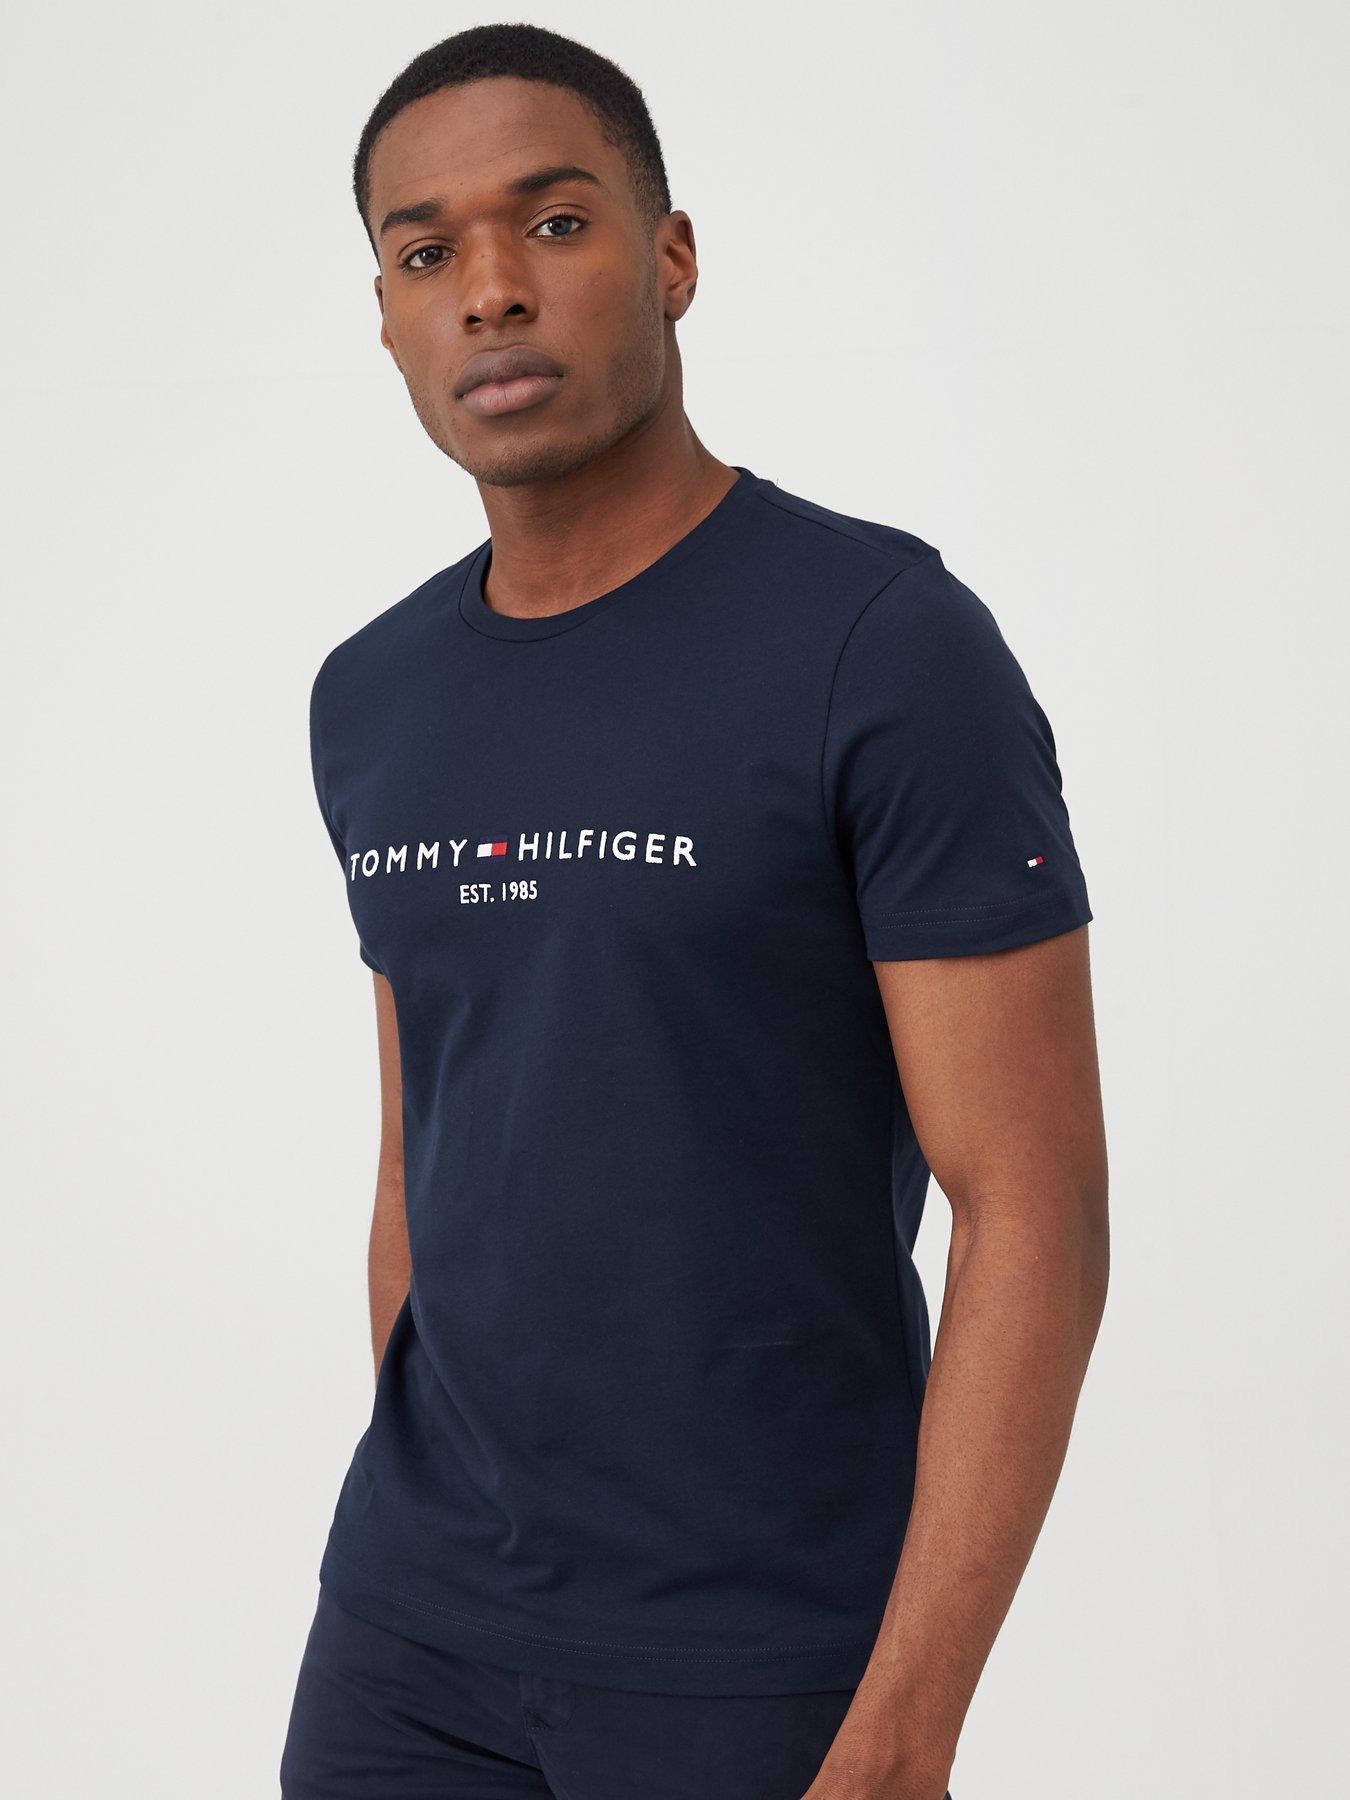 Slime Mutton span 4 | Tommy hilfiger | T-shirts & polos | Men | www.very.co.uk